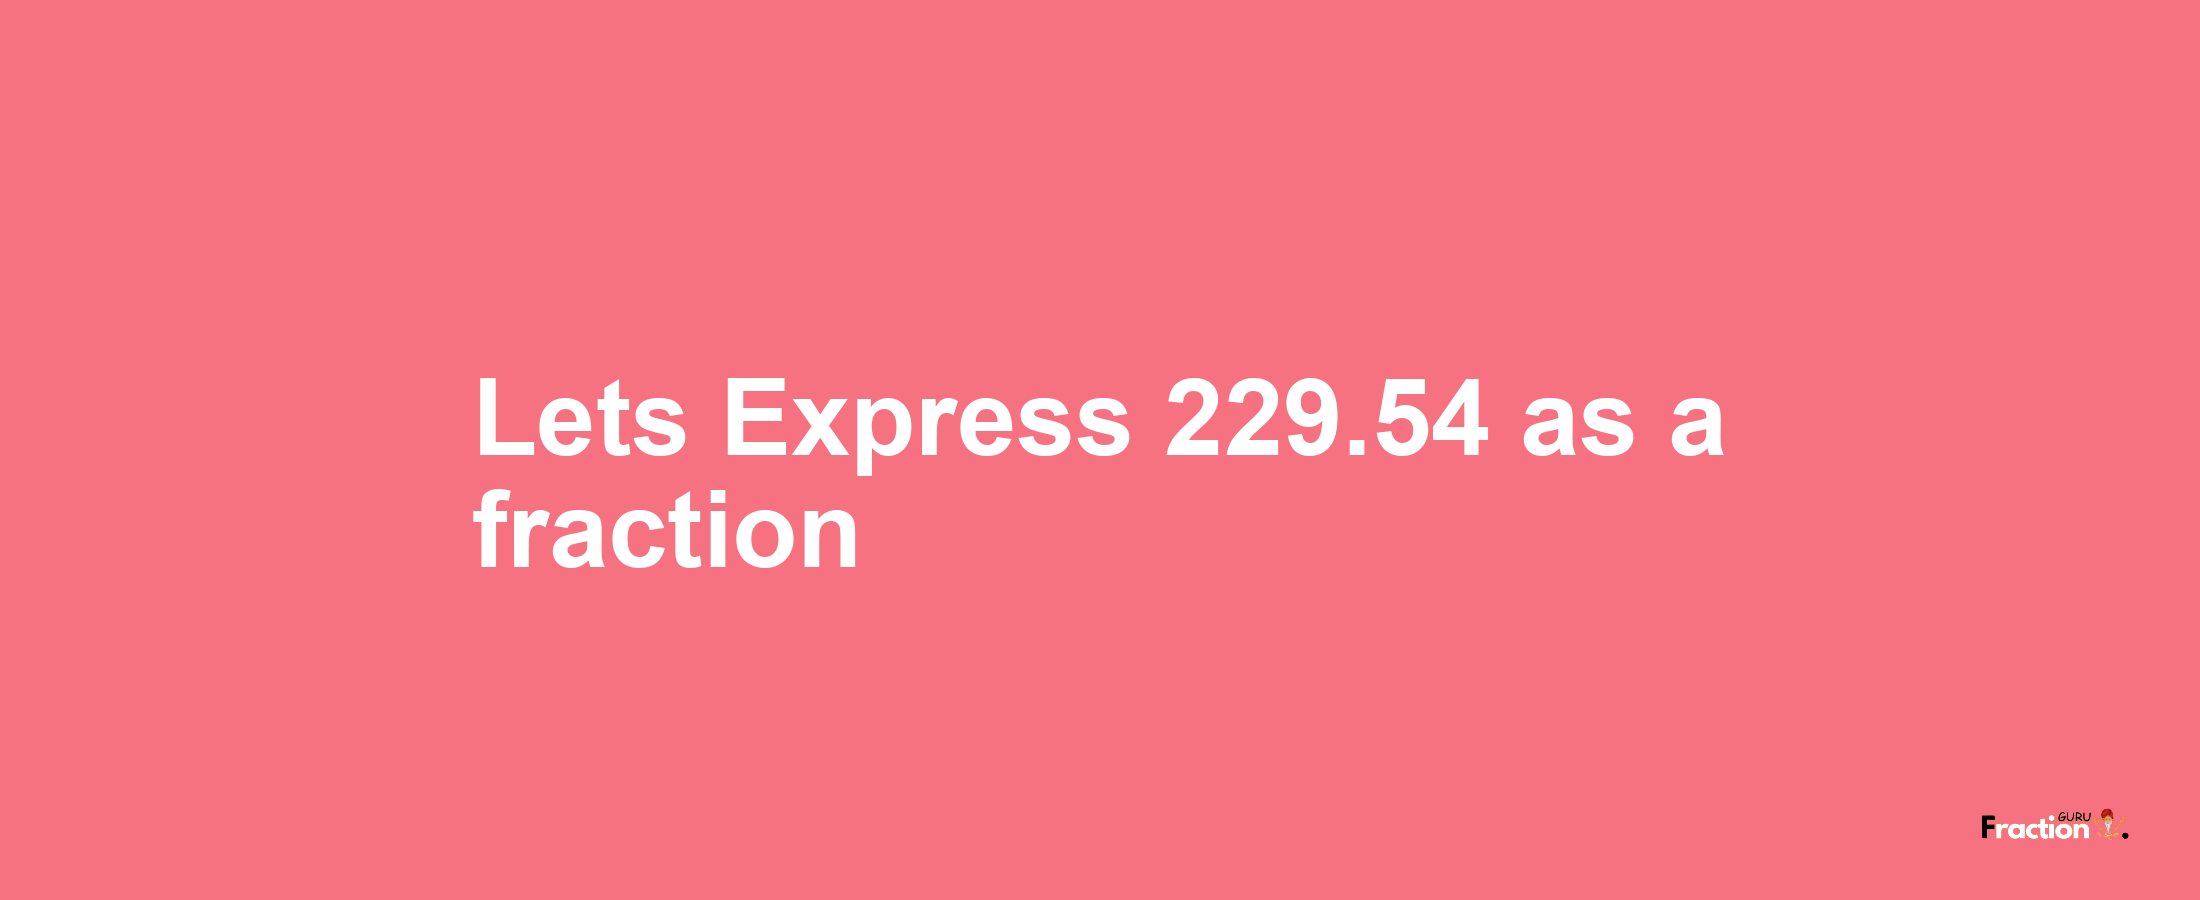 Lets Express 229.54 as afraction